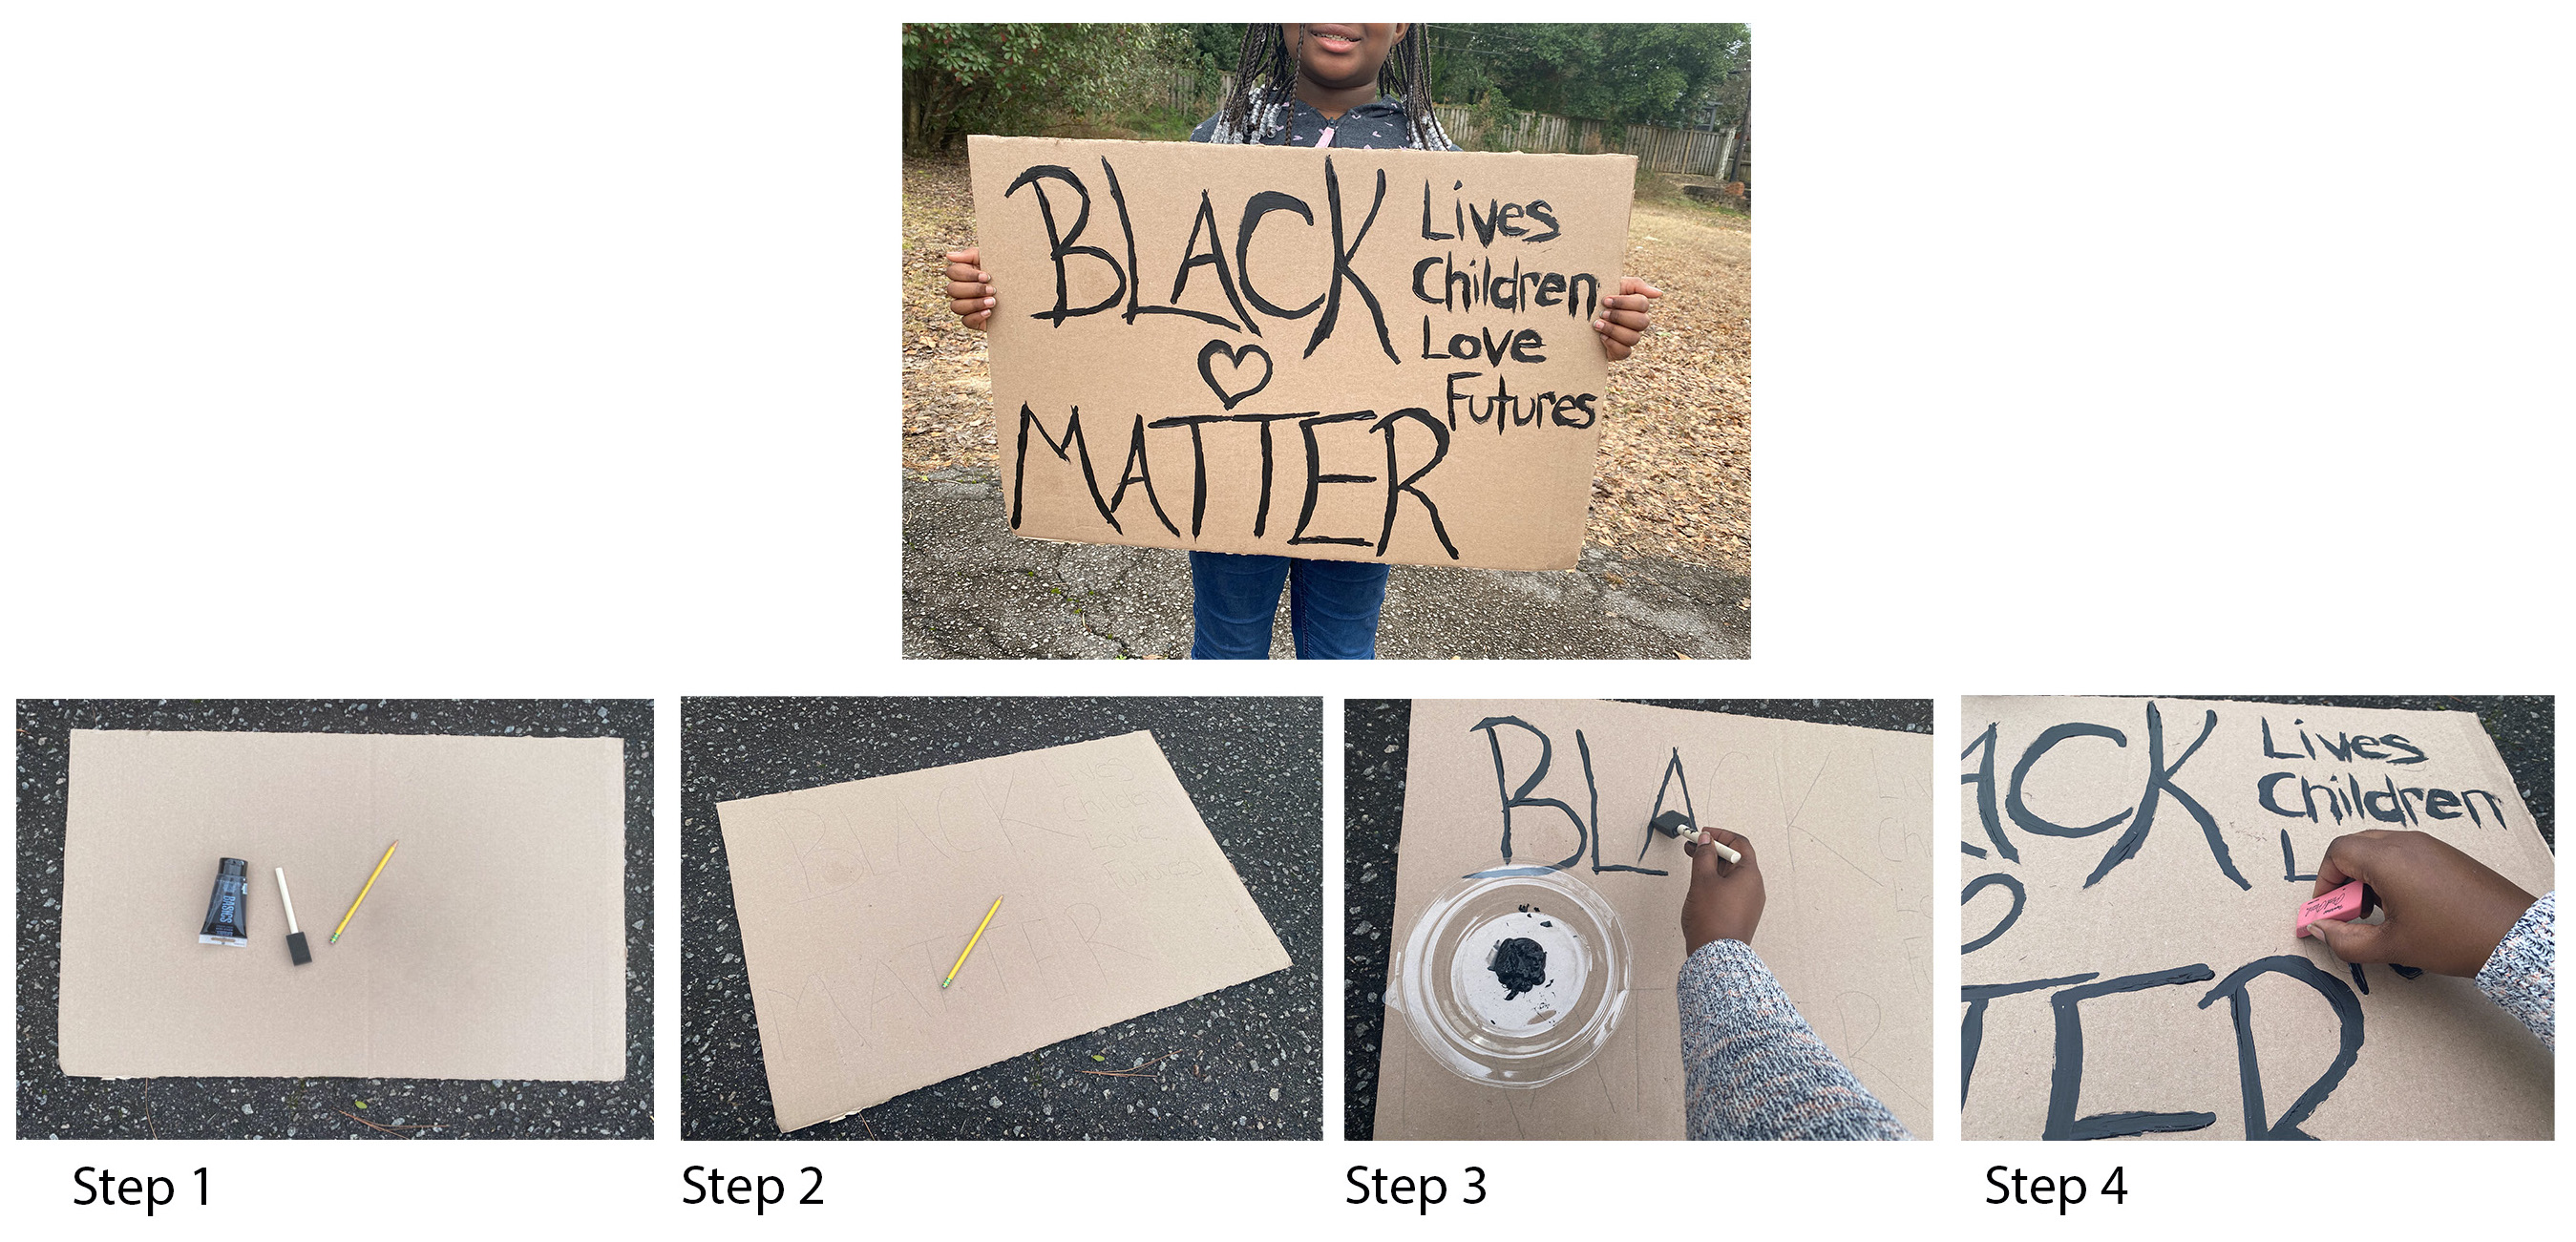 Five squares showing different steps for how to make a protest sign.